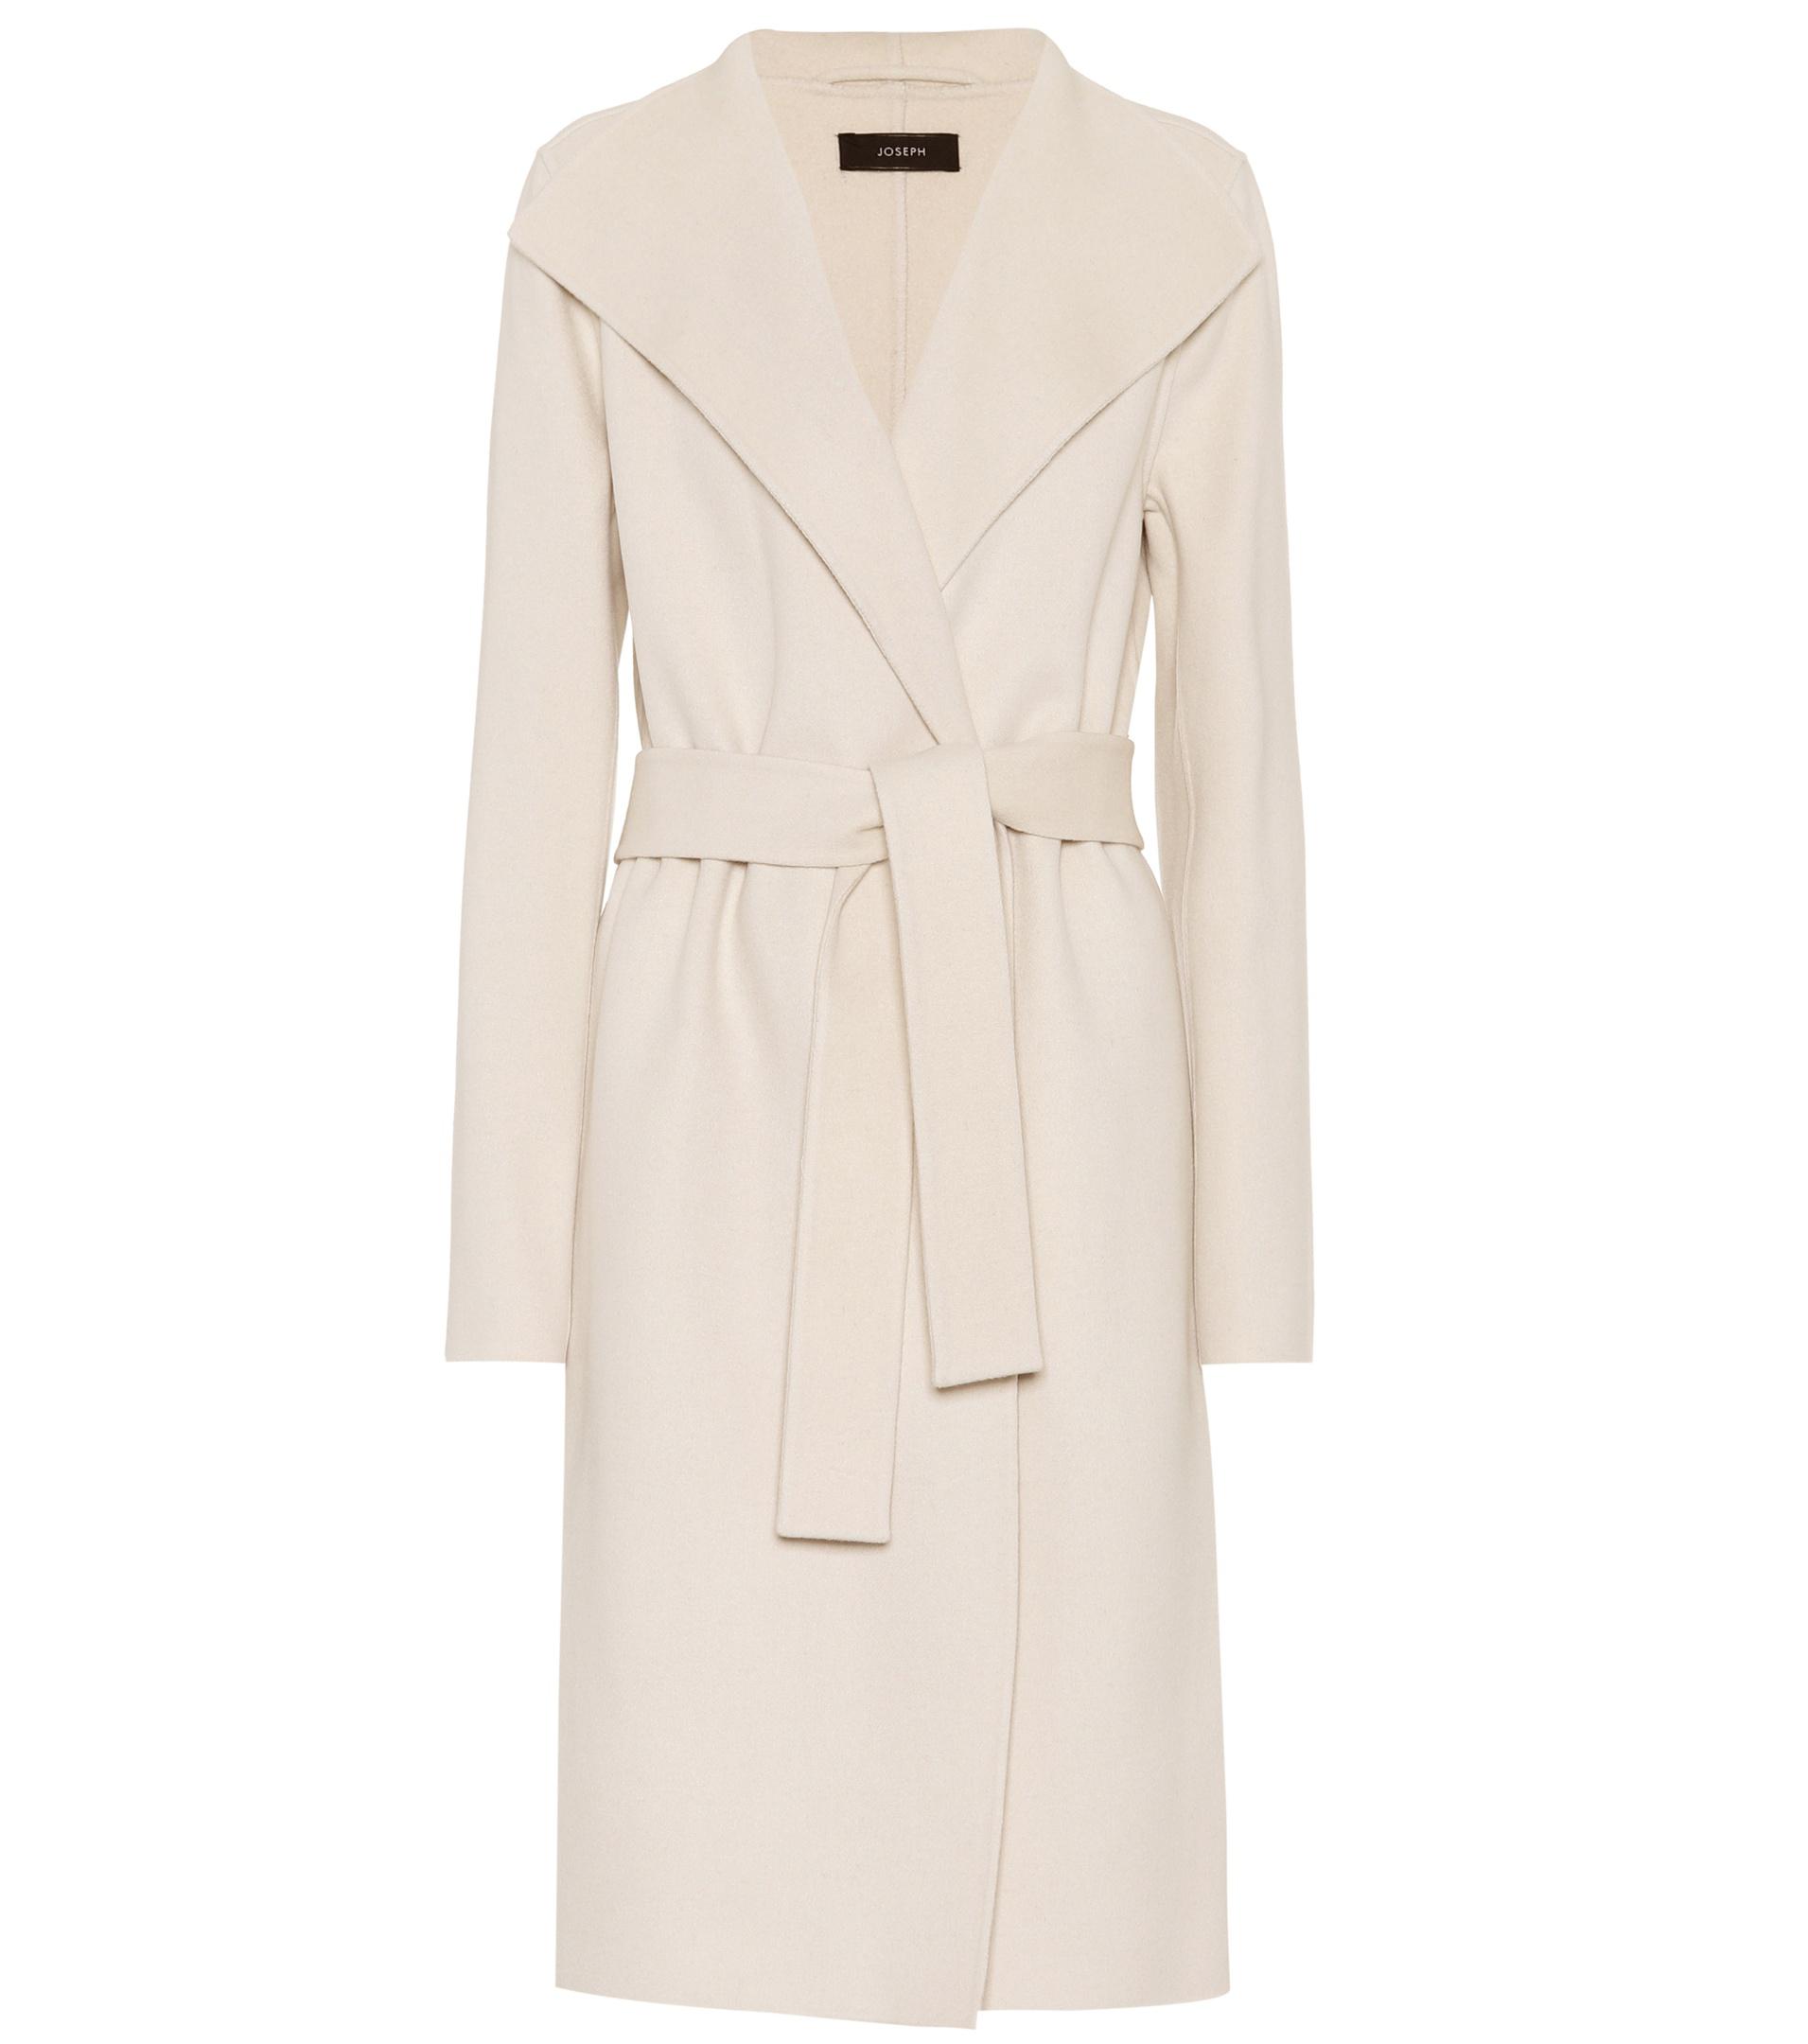 Lyst - Joseph Wool And Cashmere Blend Coat in Natural